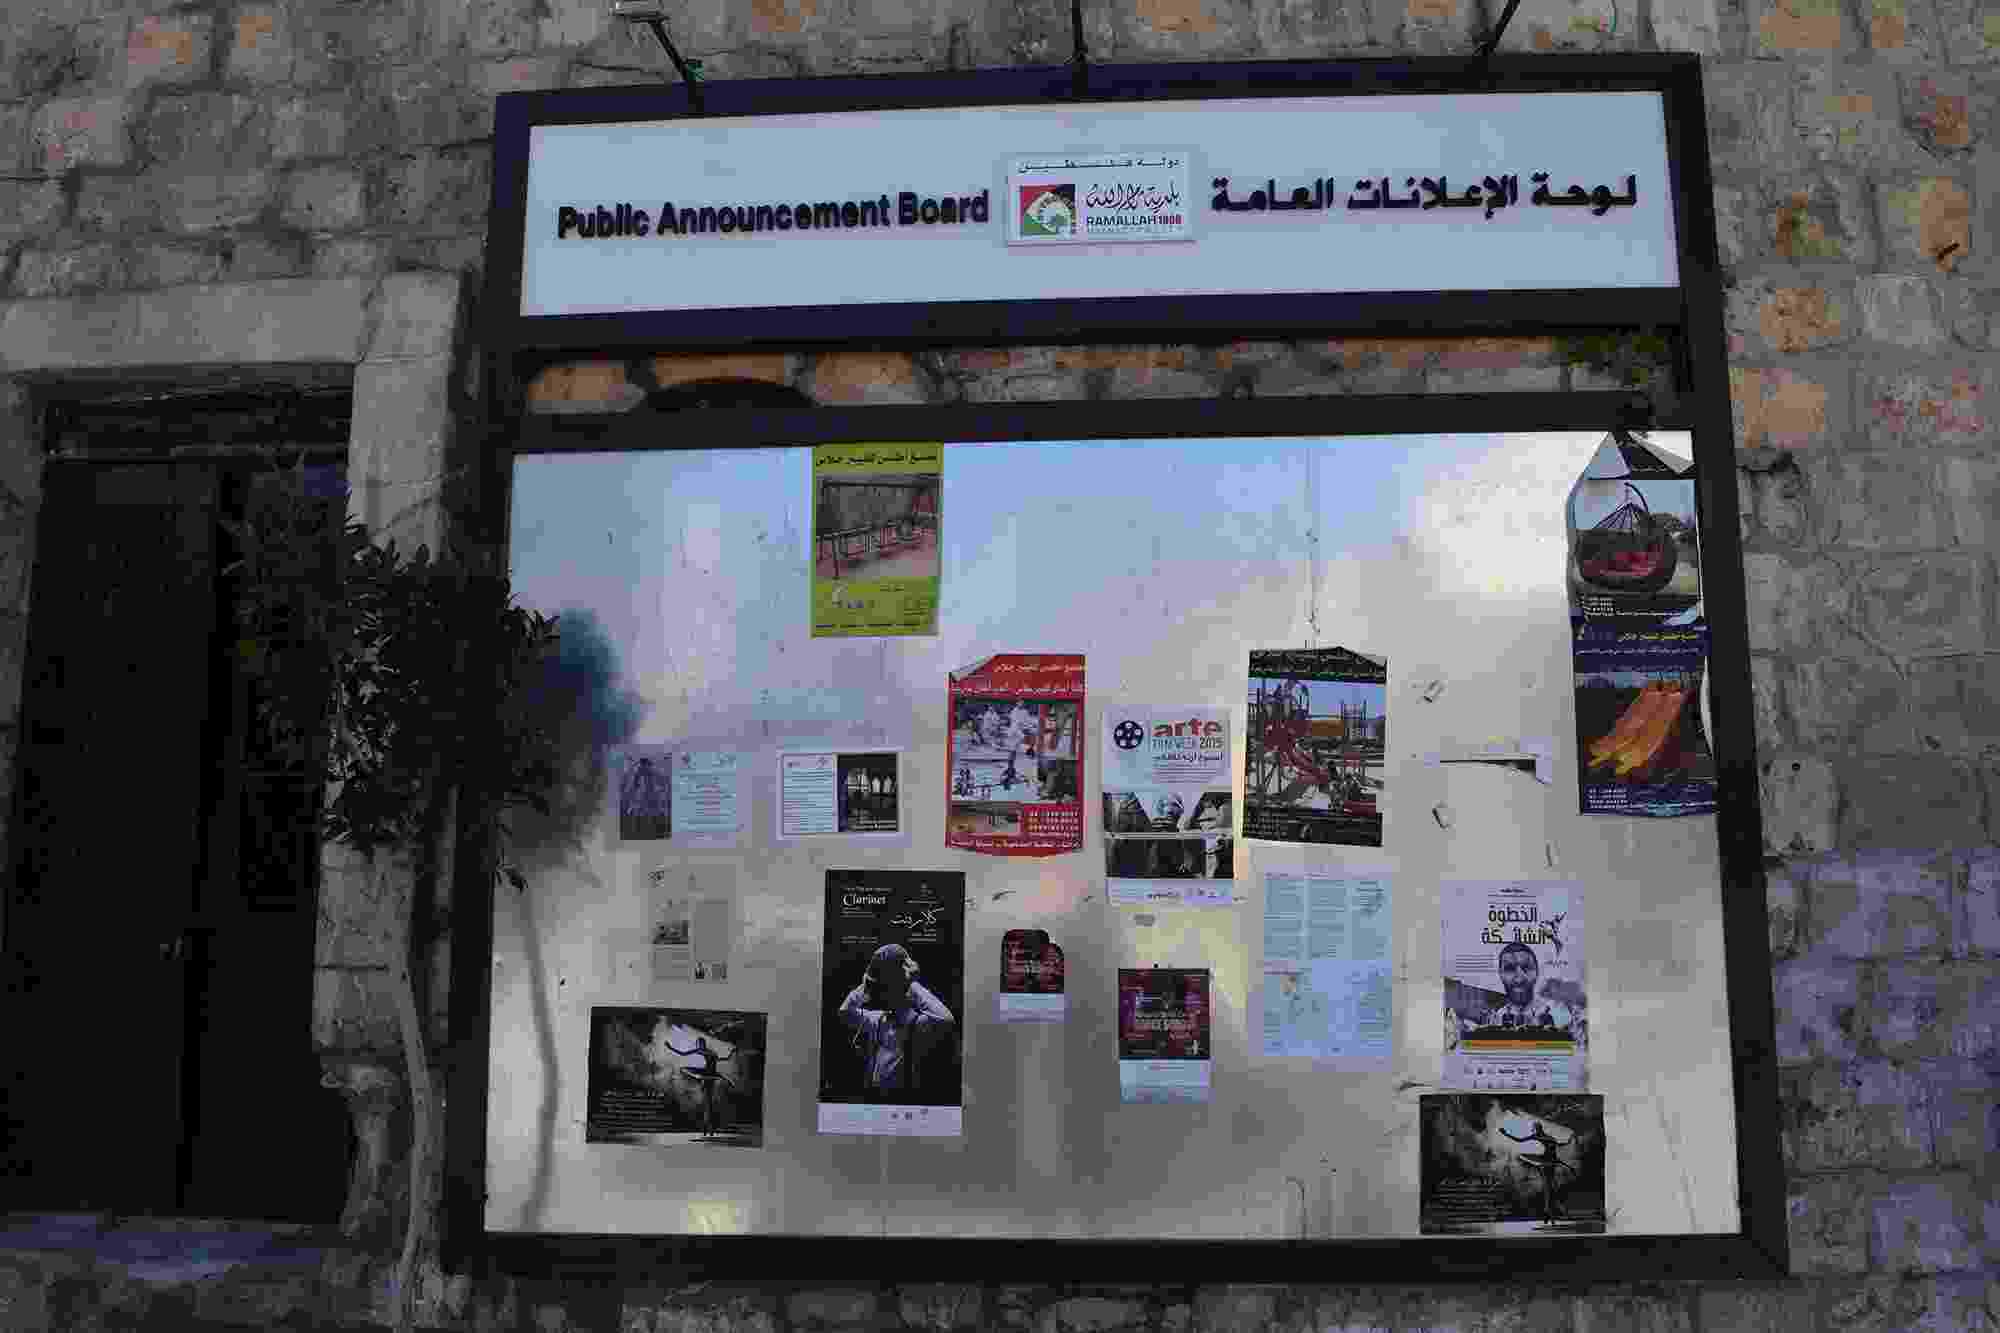 A noticeboard fixed to a stone wall, filled with announcements, adverts, and posters